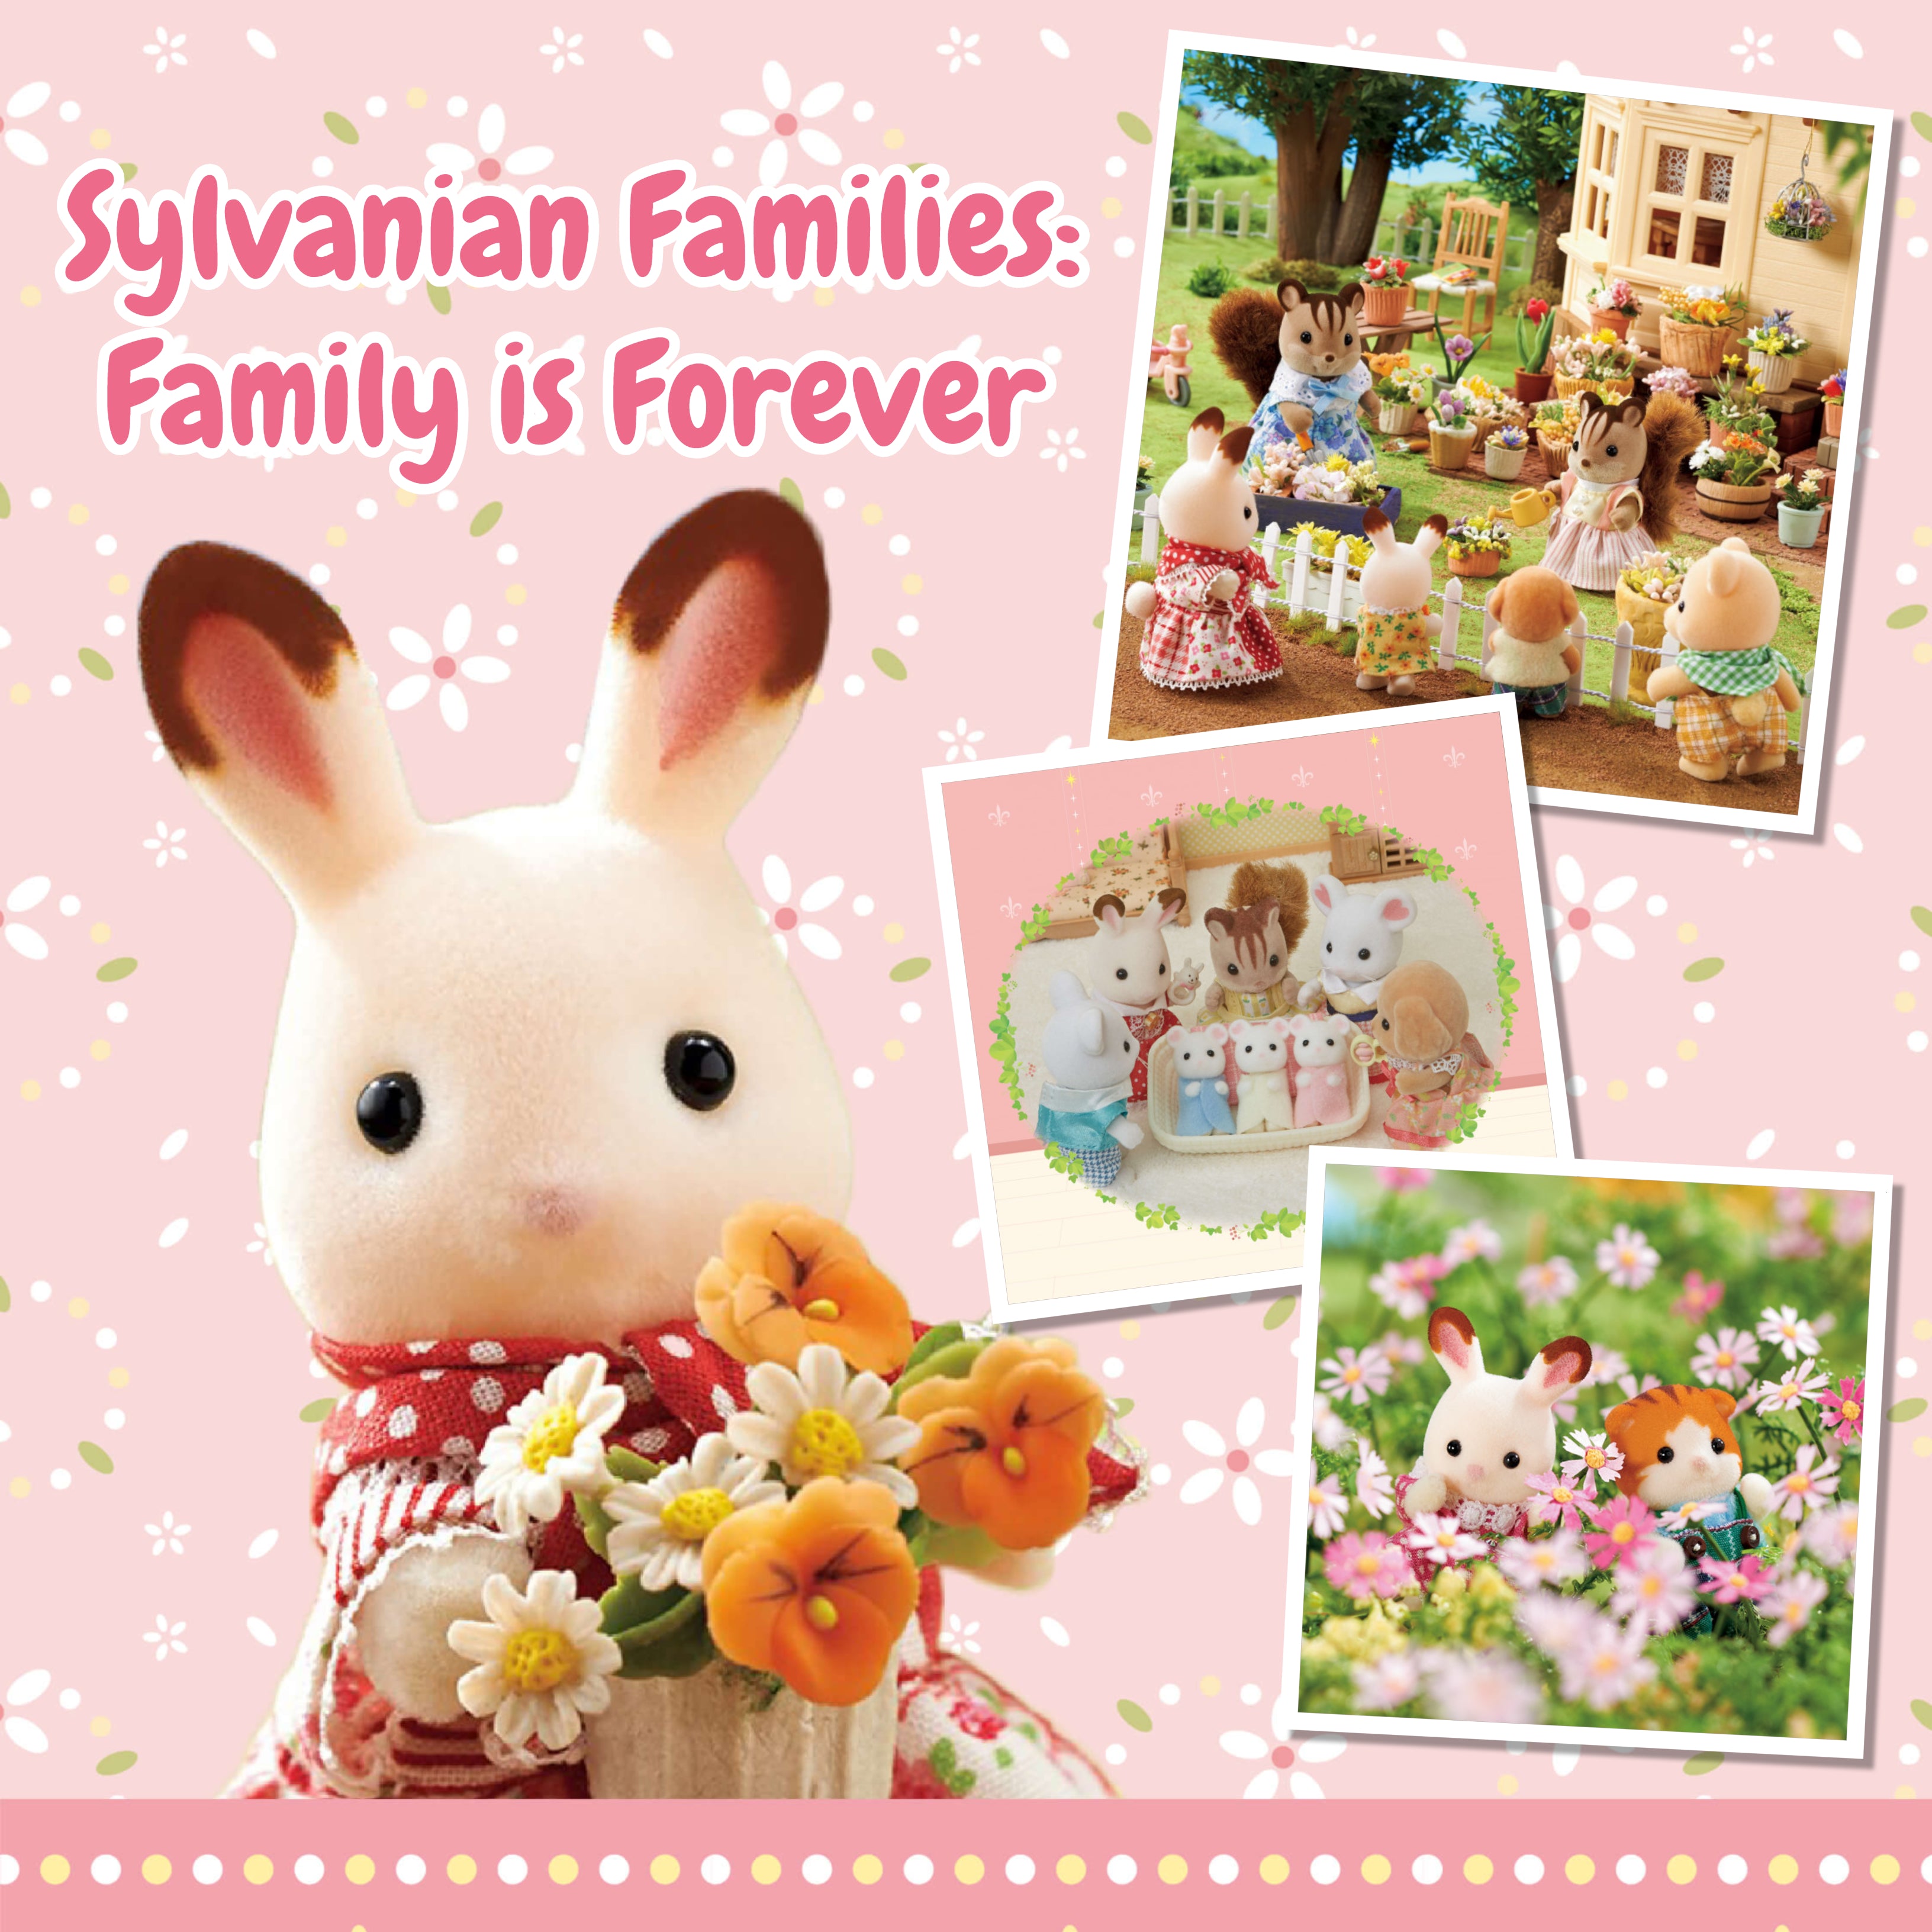 Sylvanian Families: Family is Forever